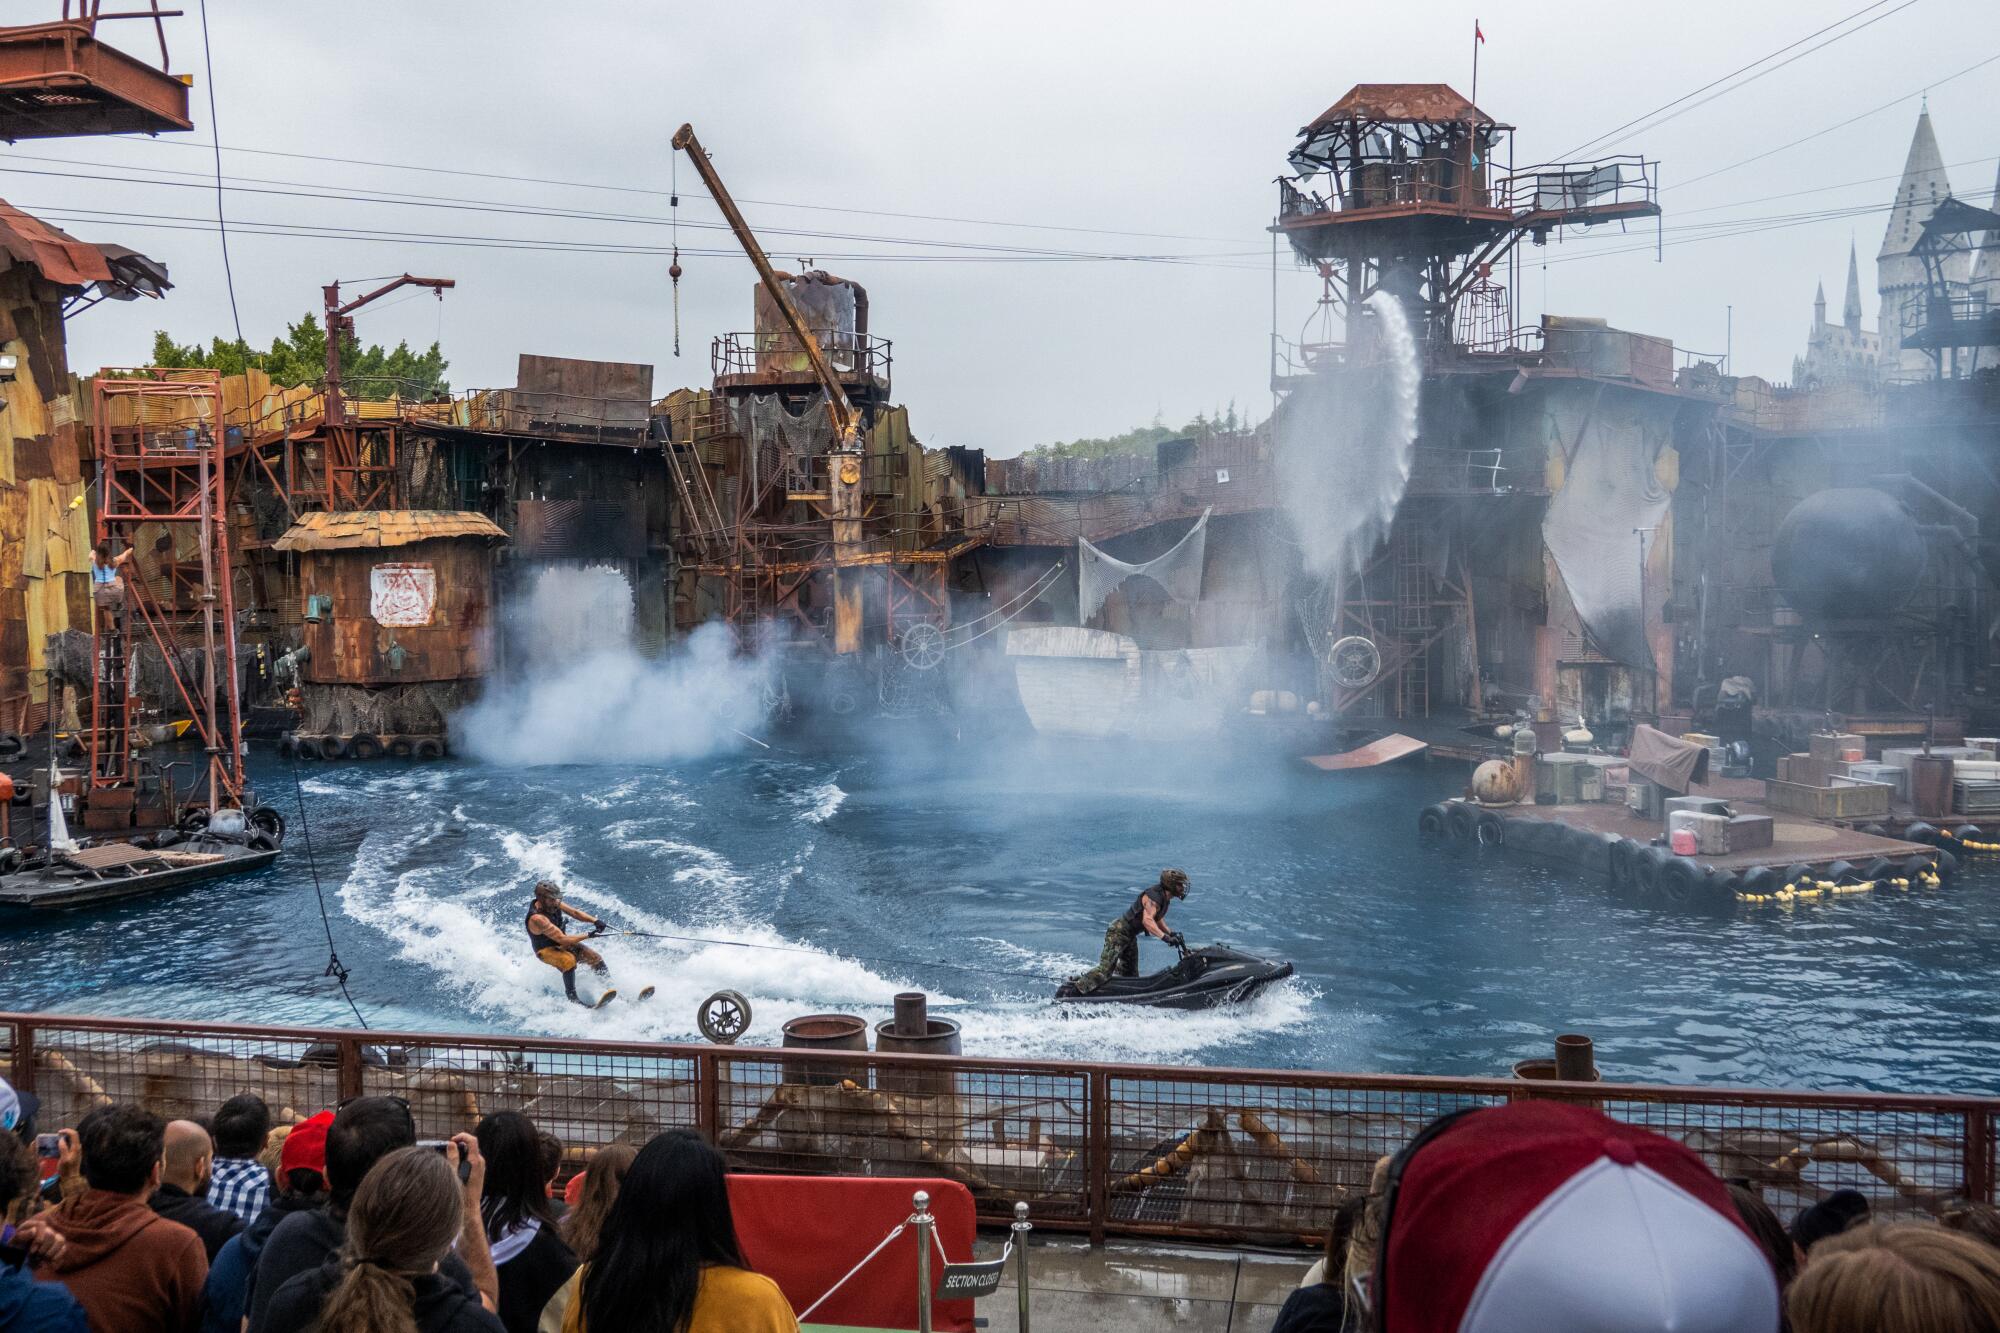 Waterworld show at Universal Studios featuring a man on skis being pulled by a jetski.